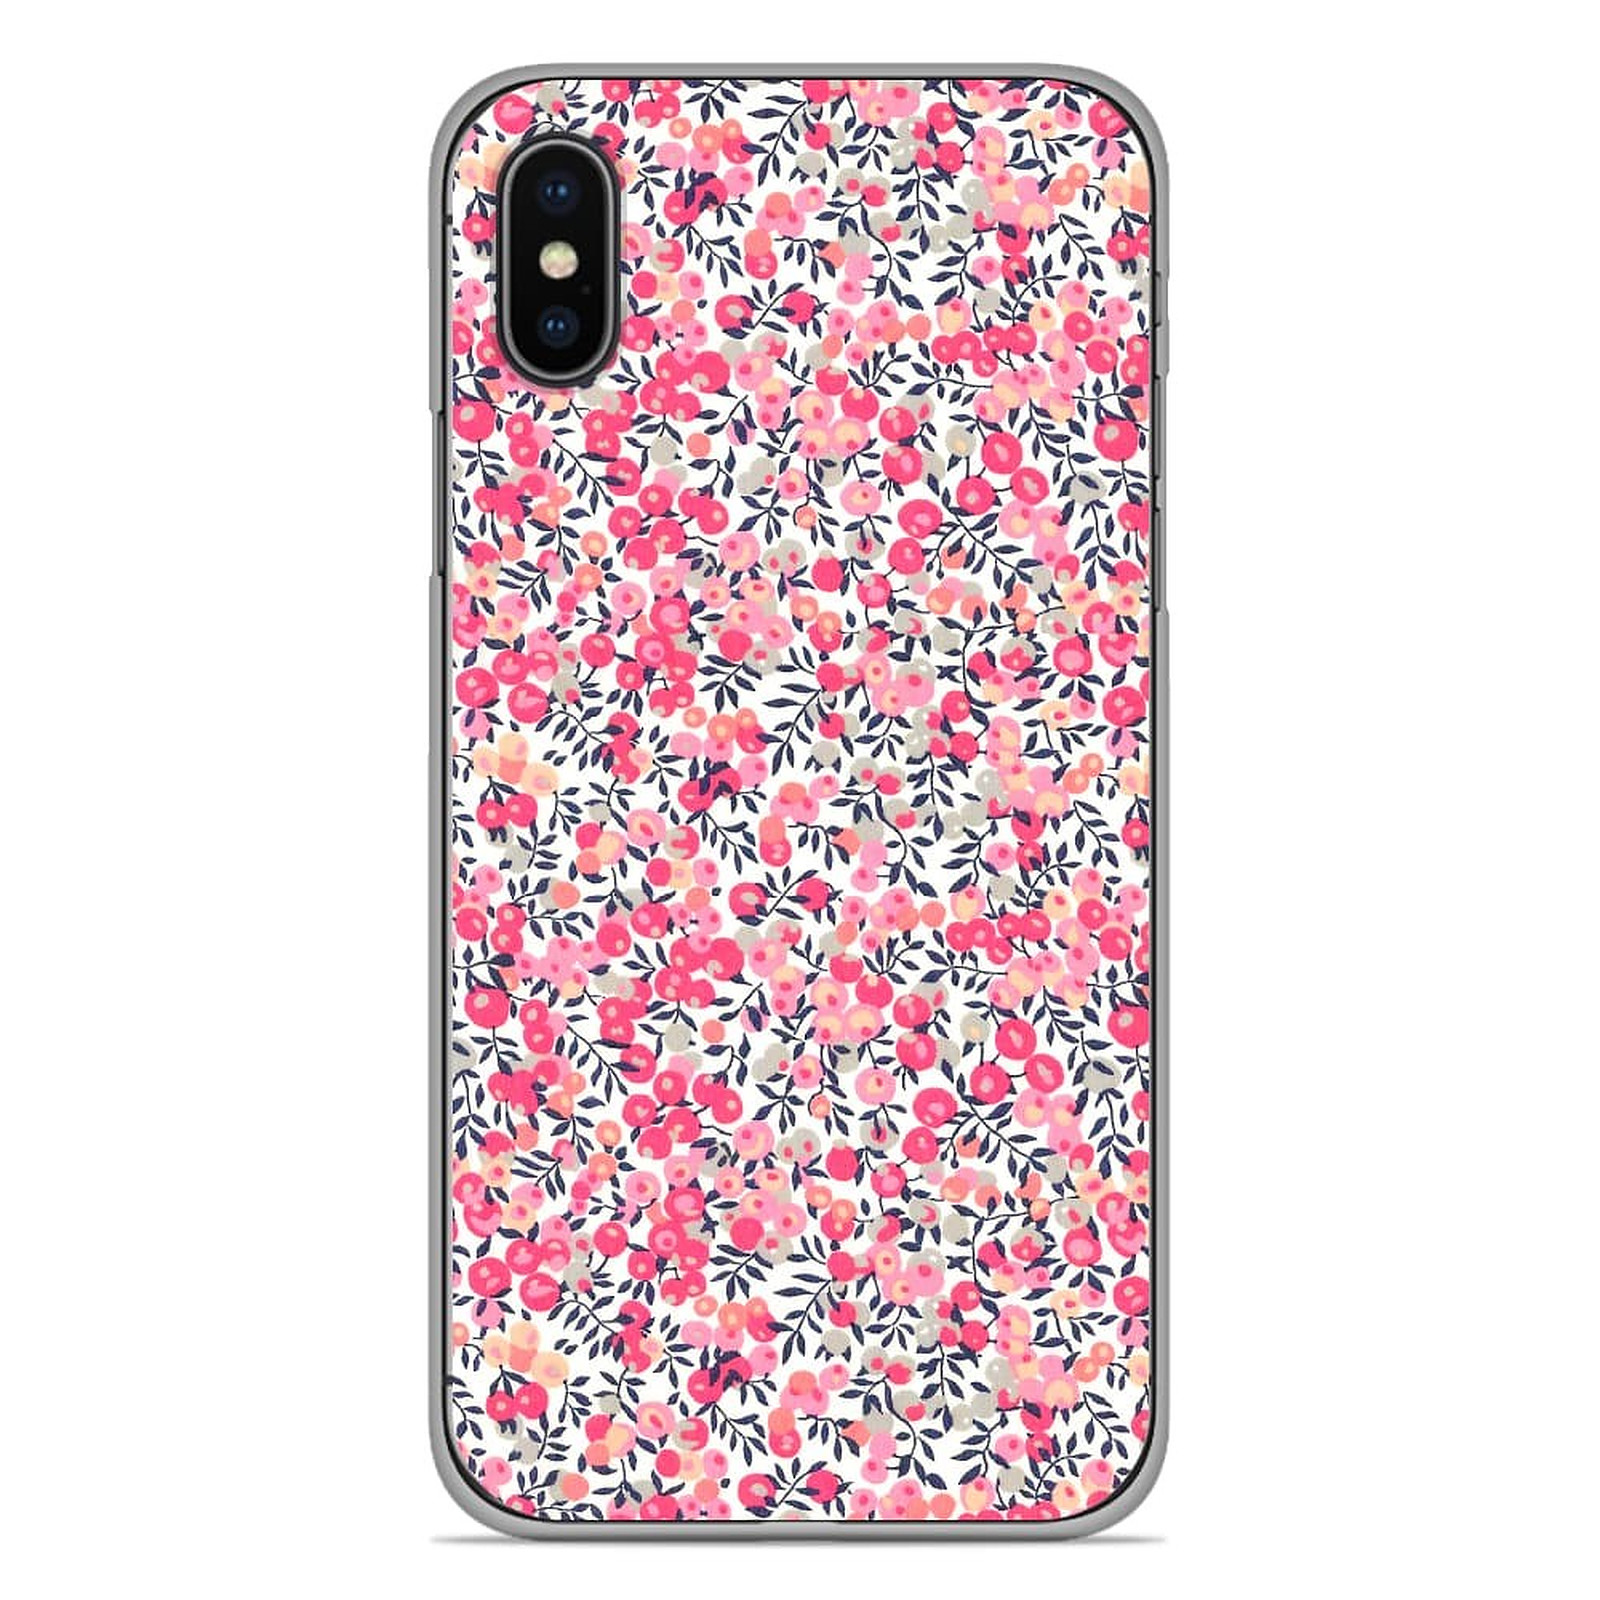 1001 Coques Coque silicone gel Apple iPhone X / XS motif Liberty Wiltshire Rose - Coque telephone 1001Coques